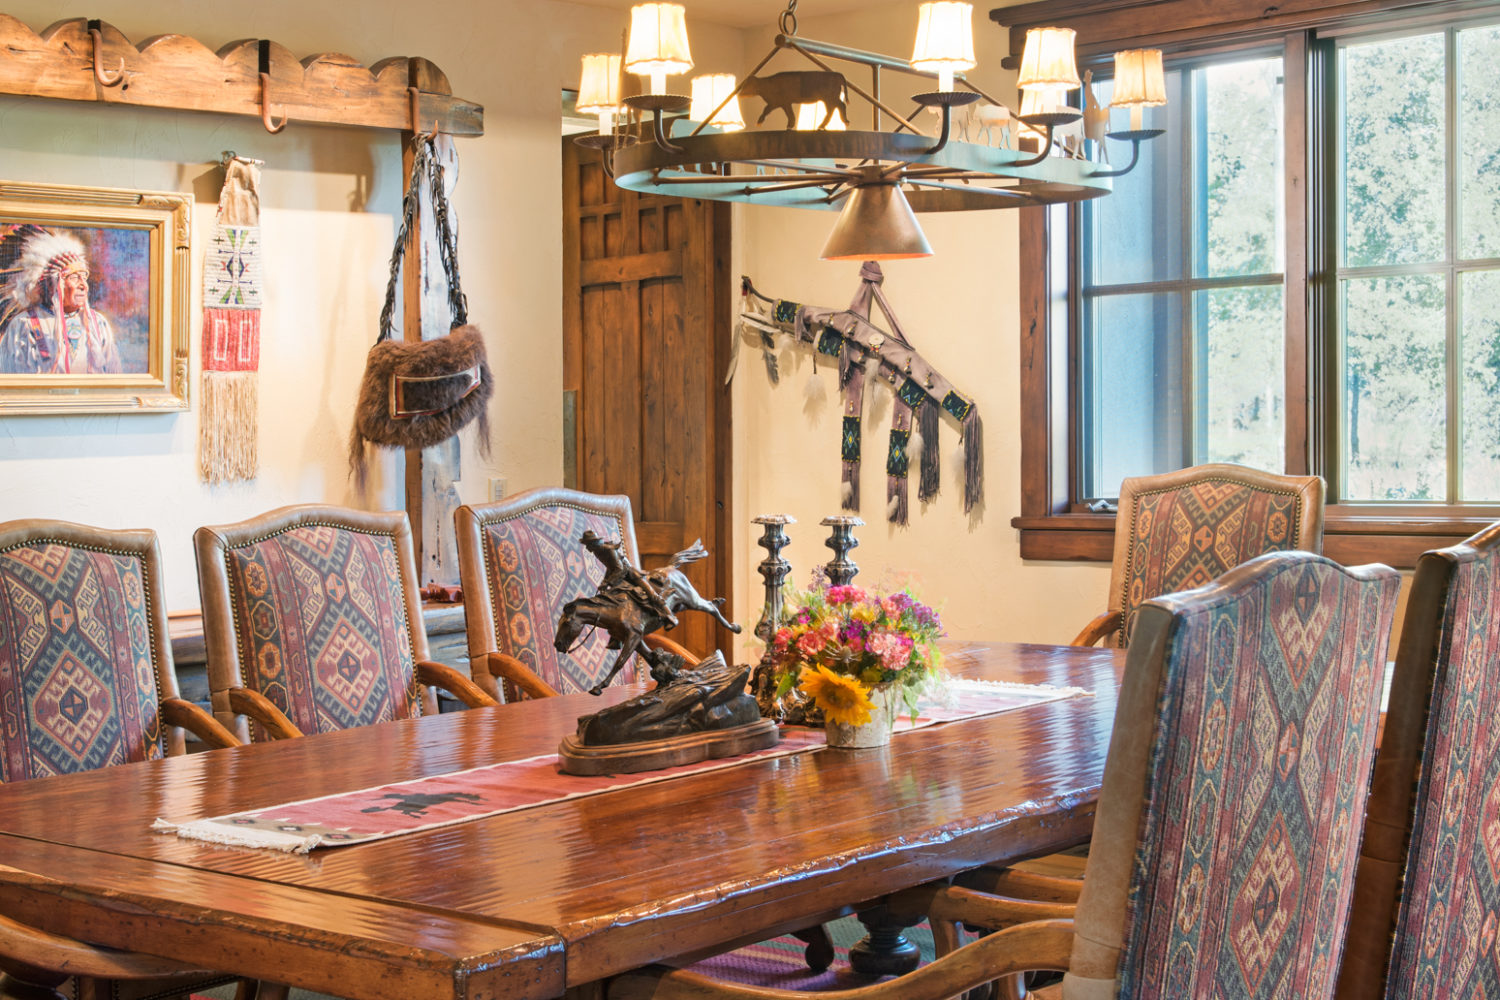 A formal spacious dining room with western art and furniture